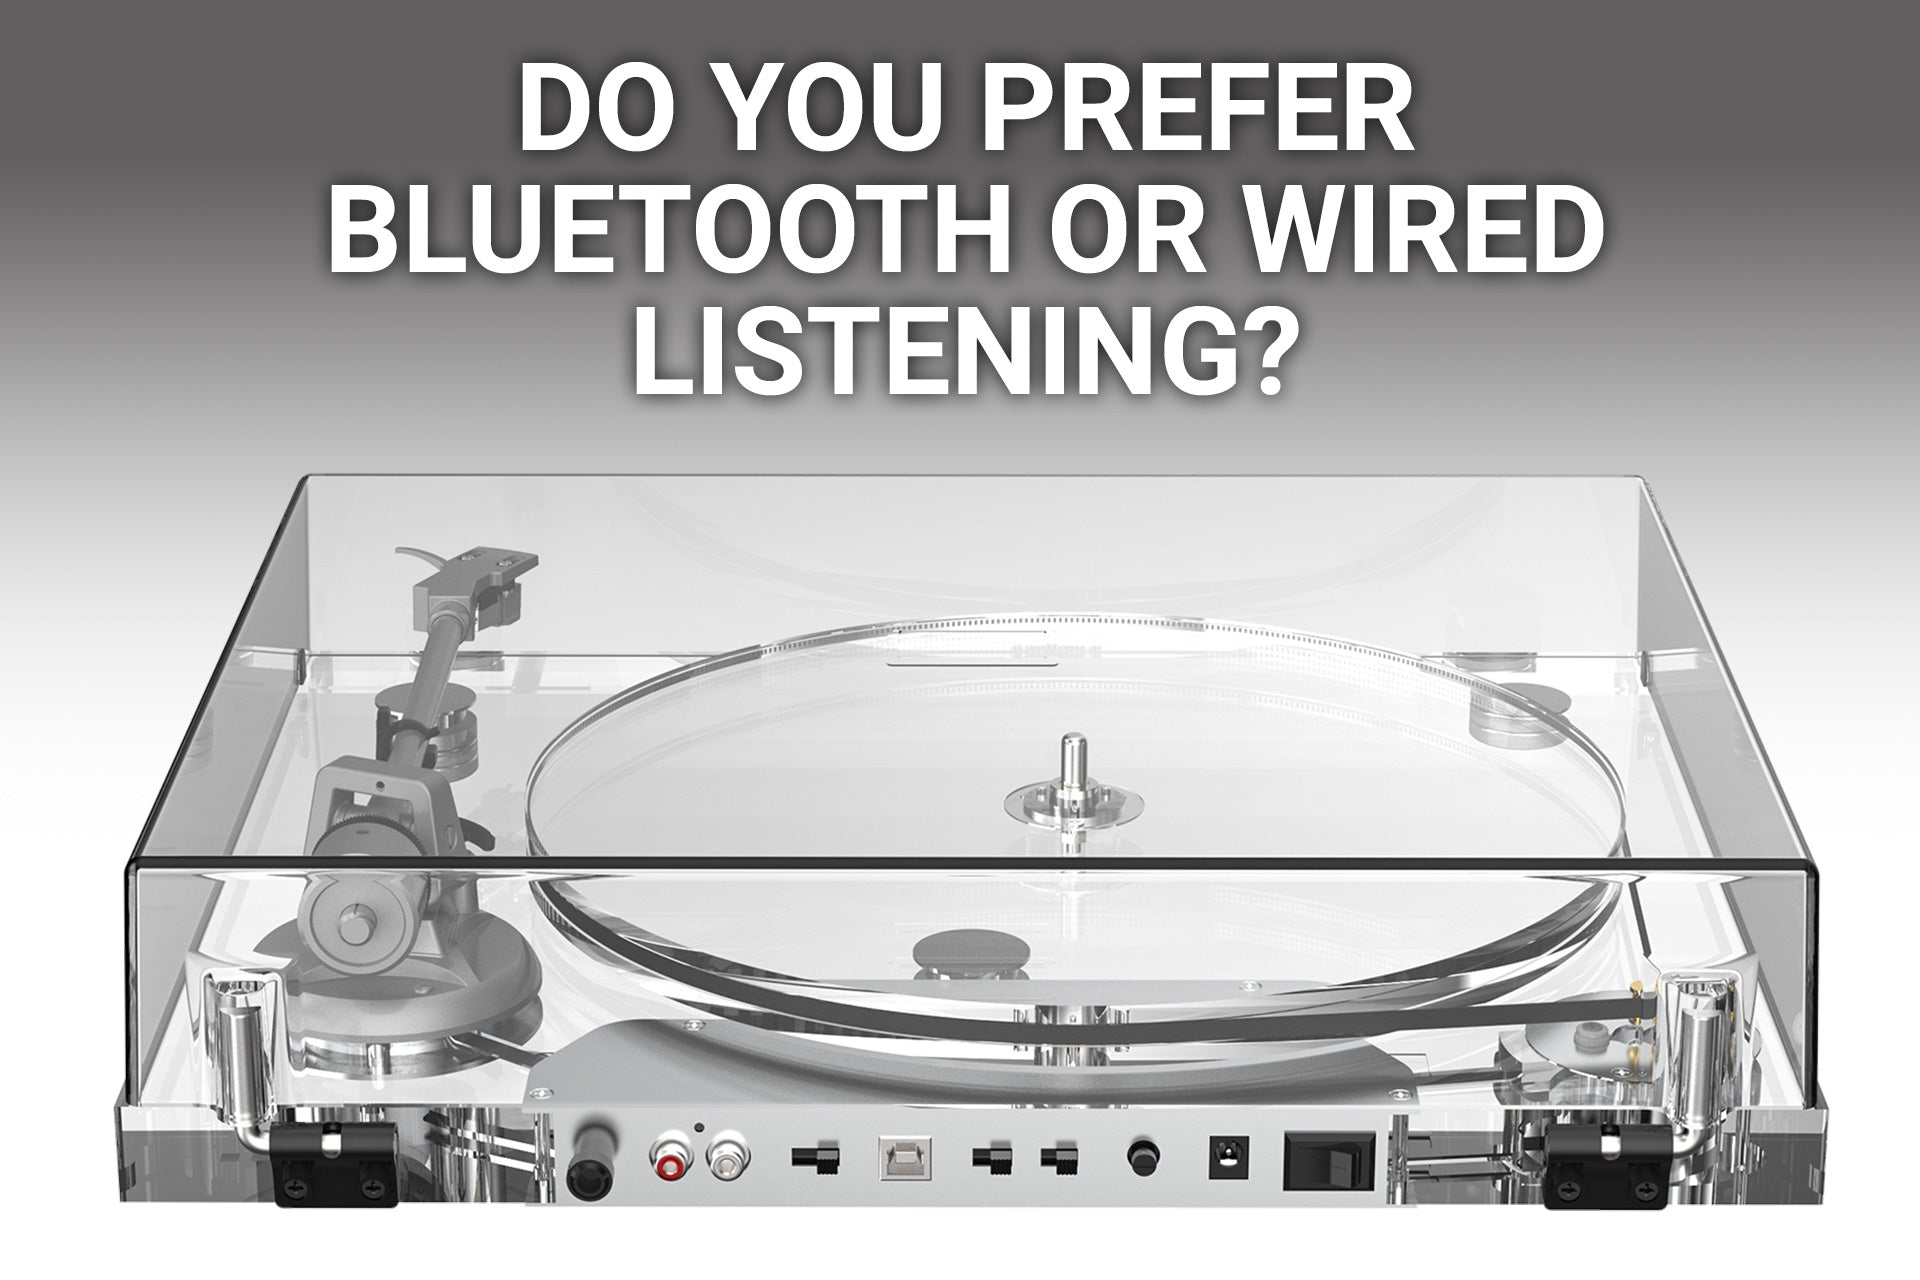 Wired Turntables vs Bluetooth Turntables: Which is Right for You?